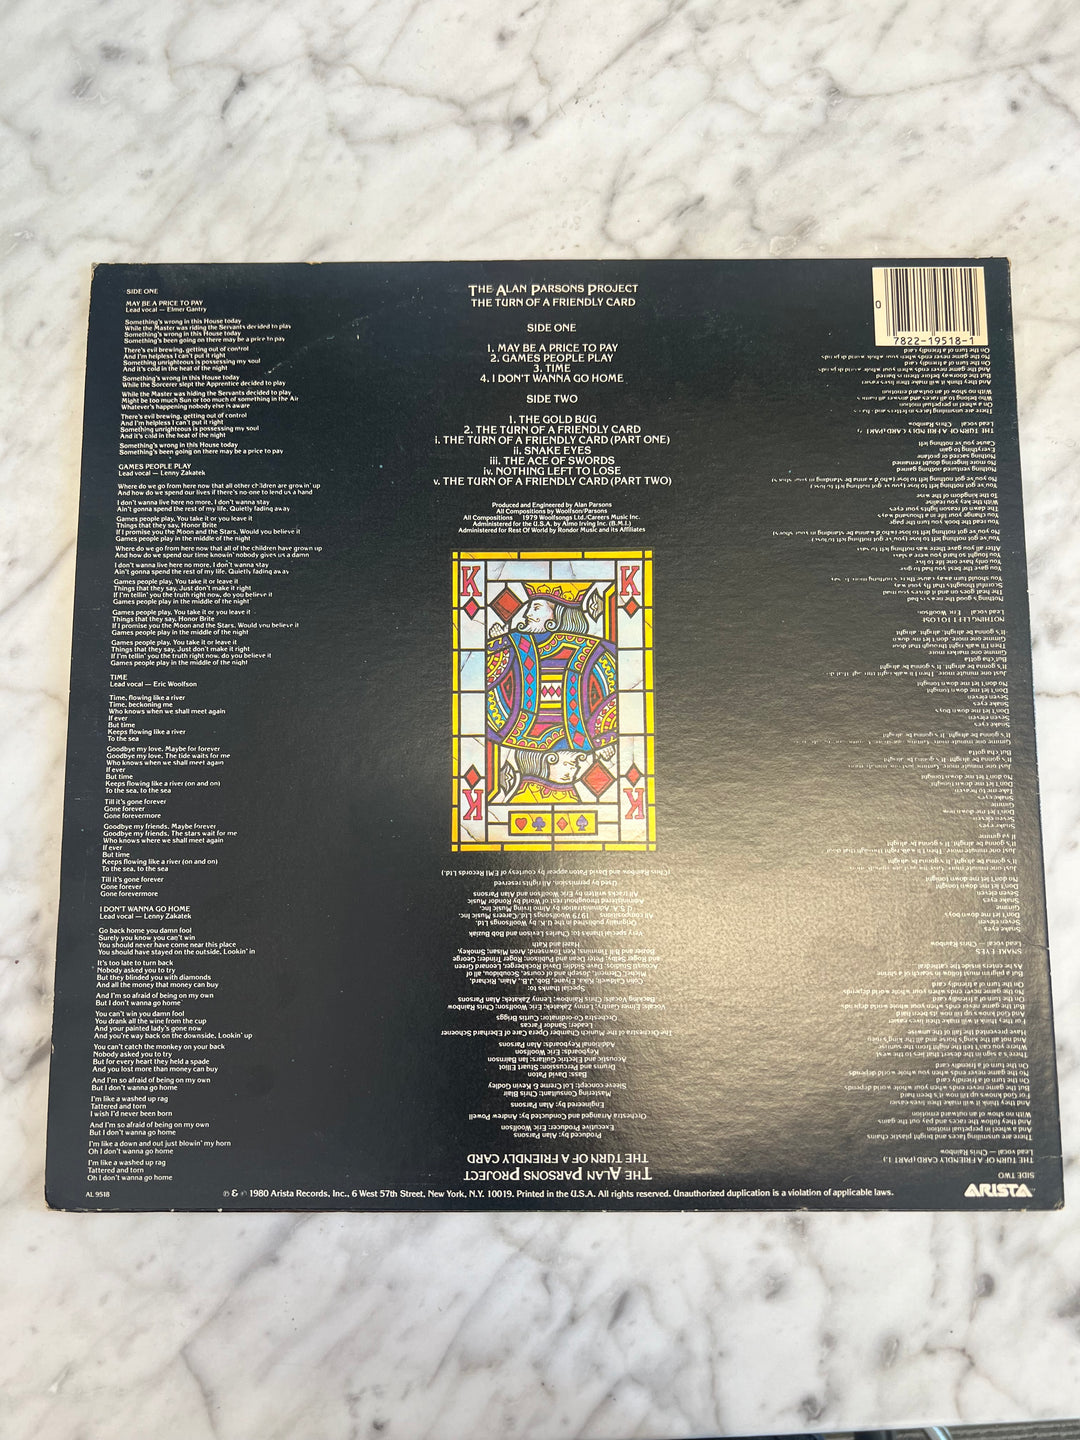 Alan Parsons Project The Turn of a Friendly Card Vinyl Record al9518